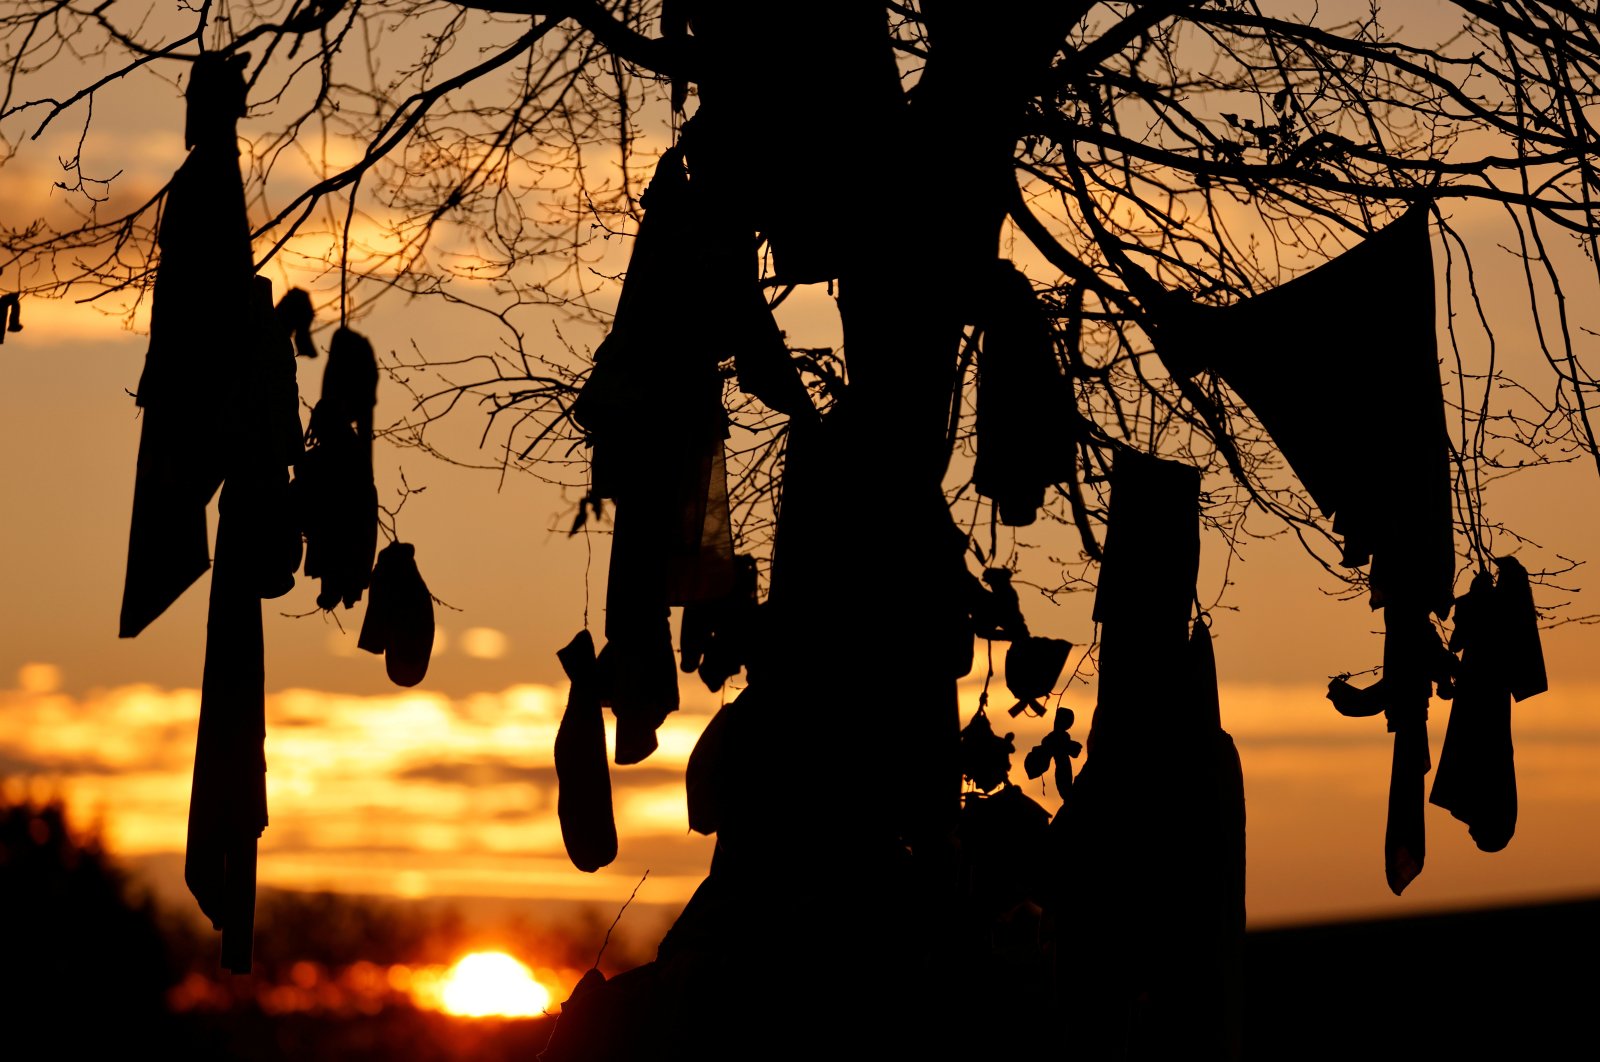 A view of "l'arbre a loques", a "healing" tree to which people attach cloths as a ritual for good health according to Celtic tradition in Hasnon, France, Dec. 6, 2020. (REUTERS Photo)